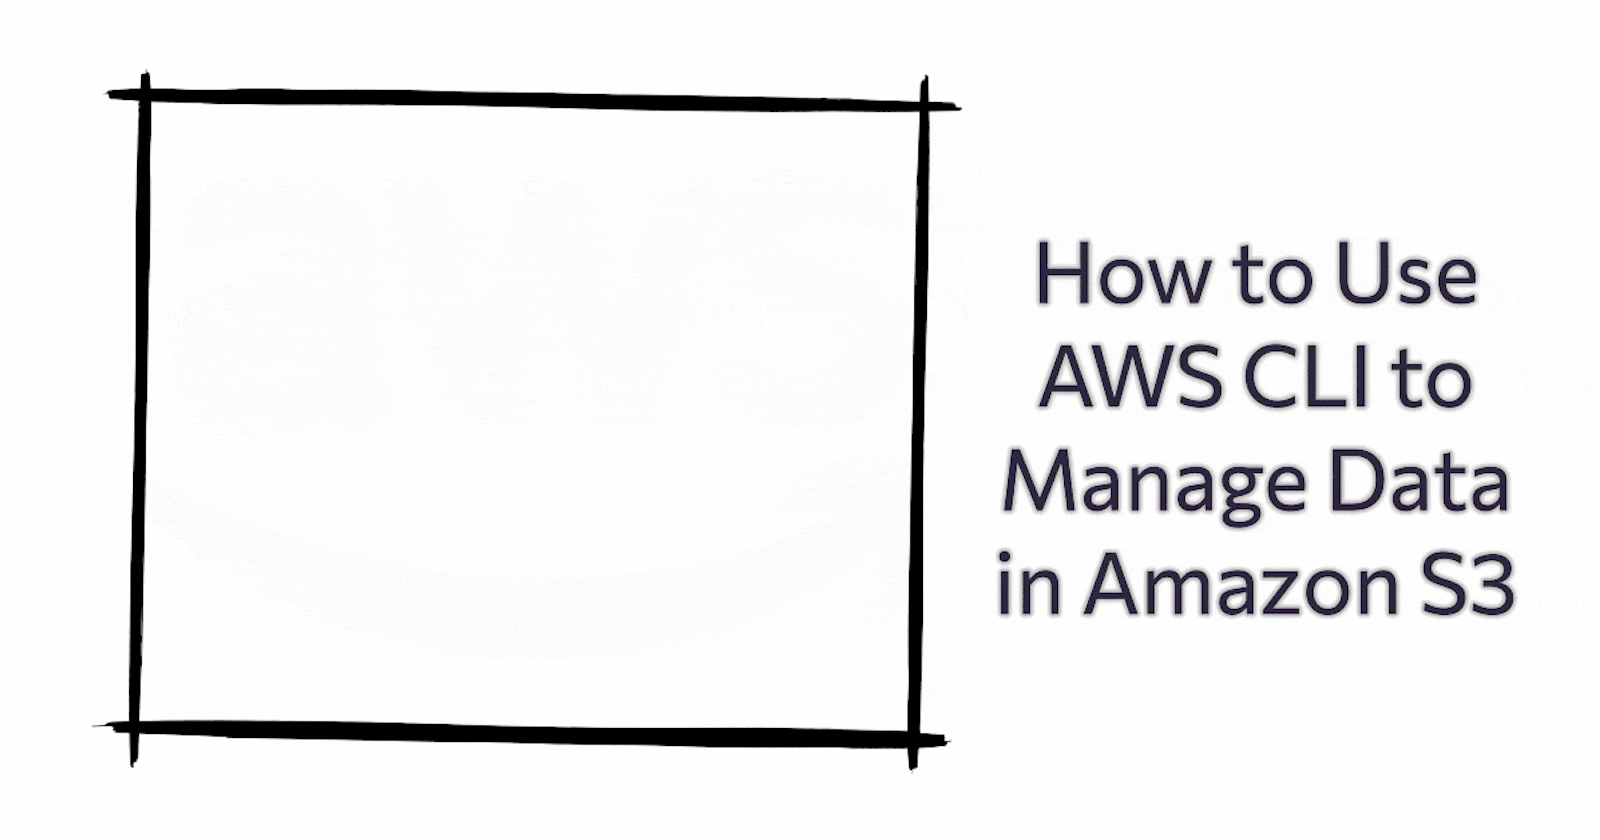 How to Use AWS CLI to Manage Data in Amazon S3 | Day 43 of 90 Days of DevOps